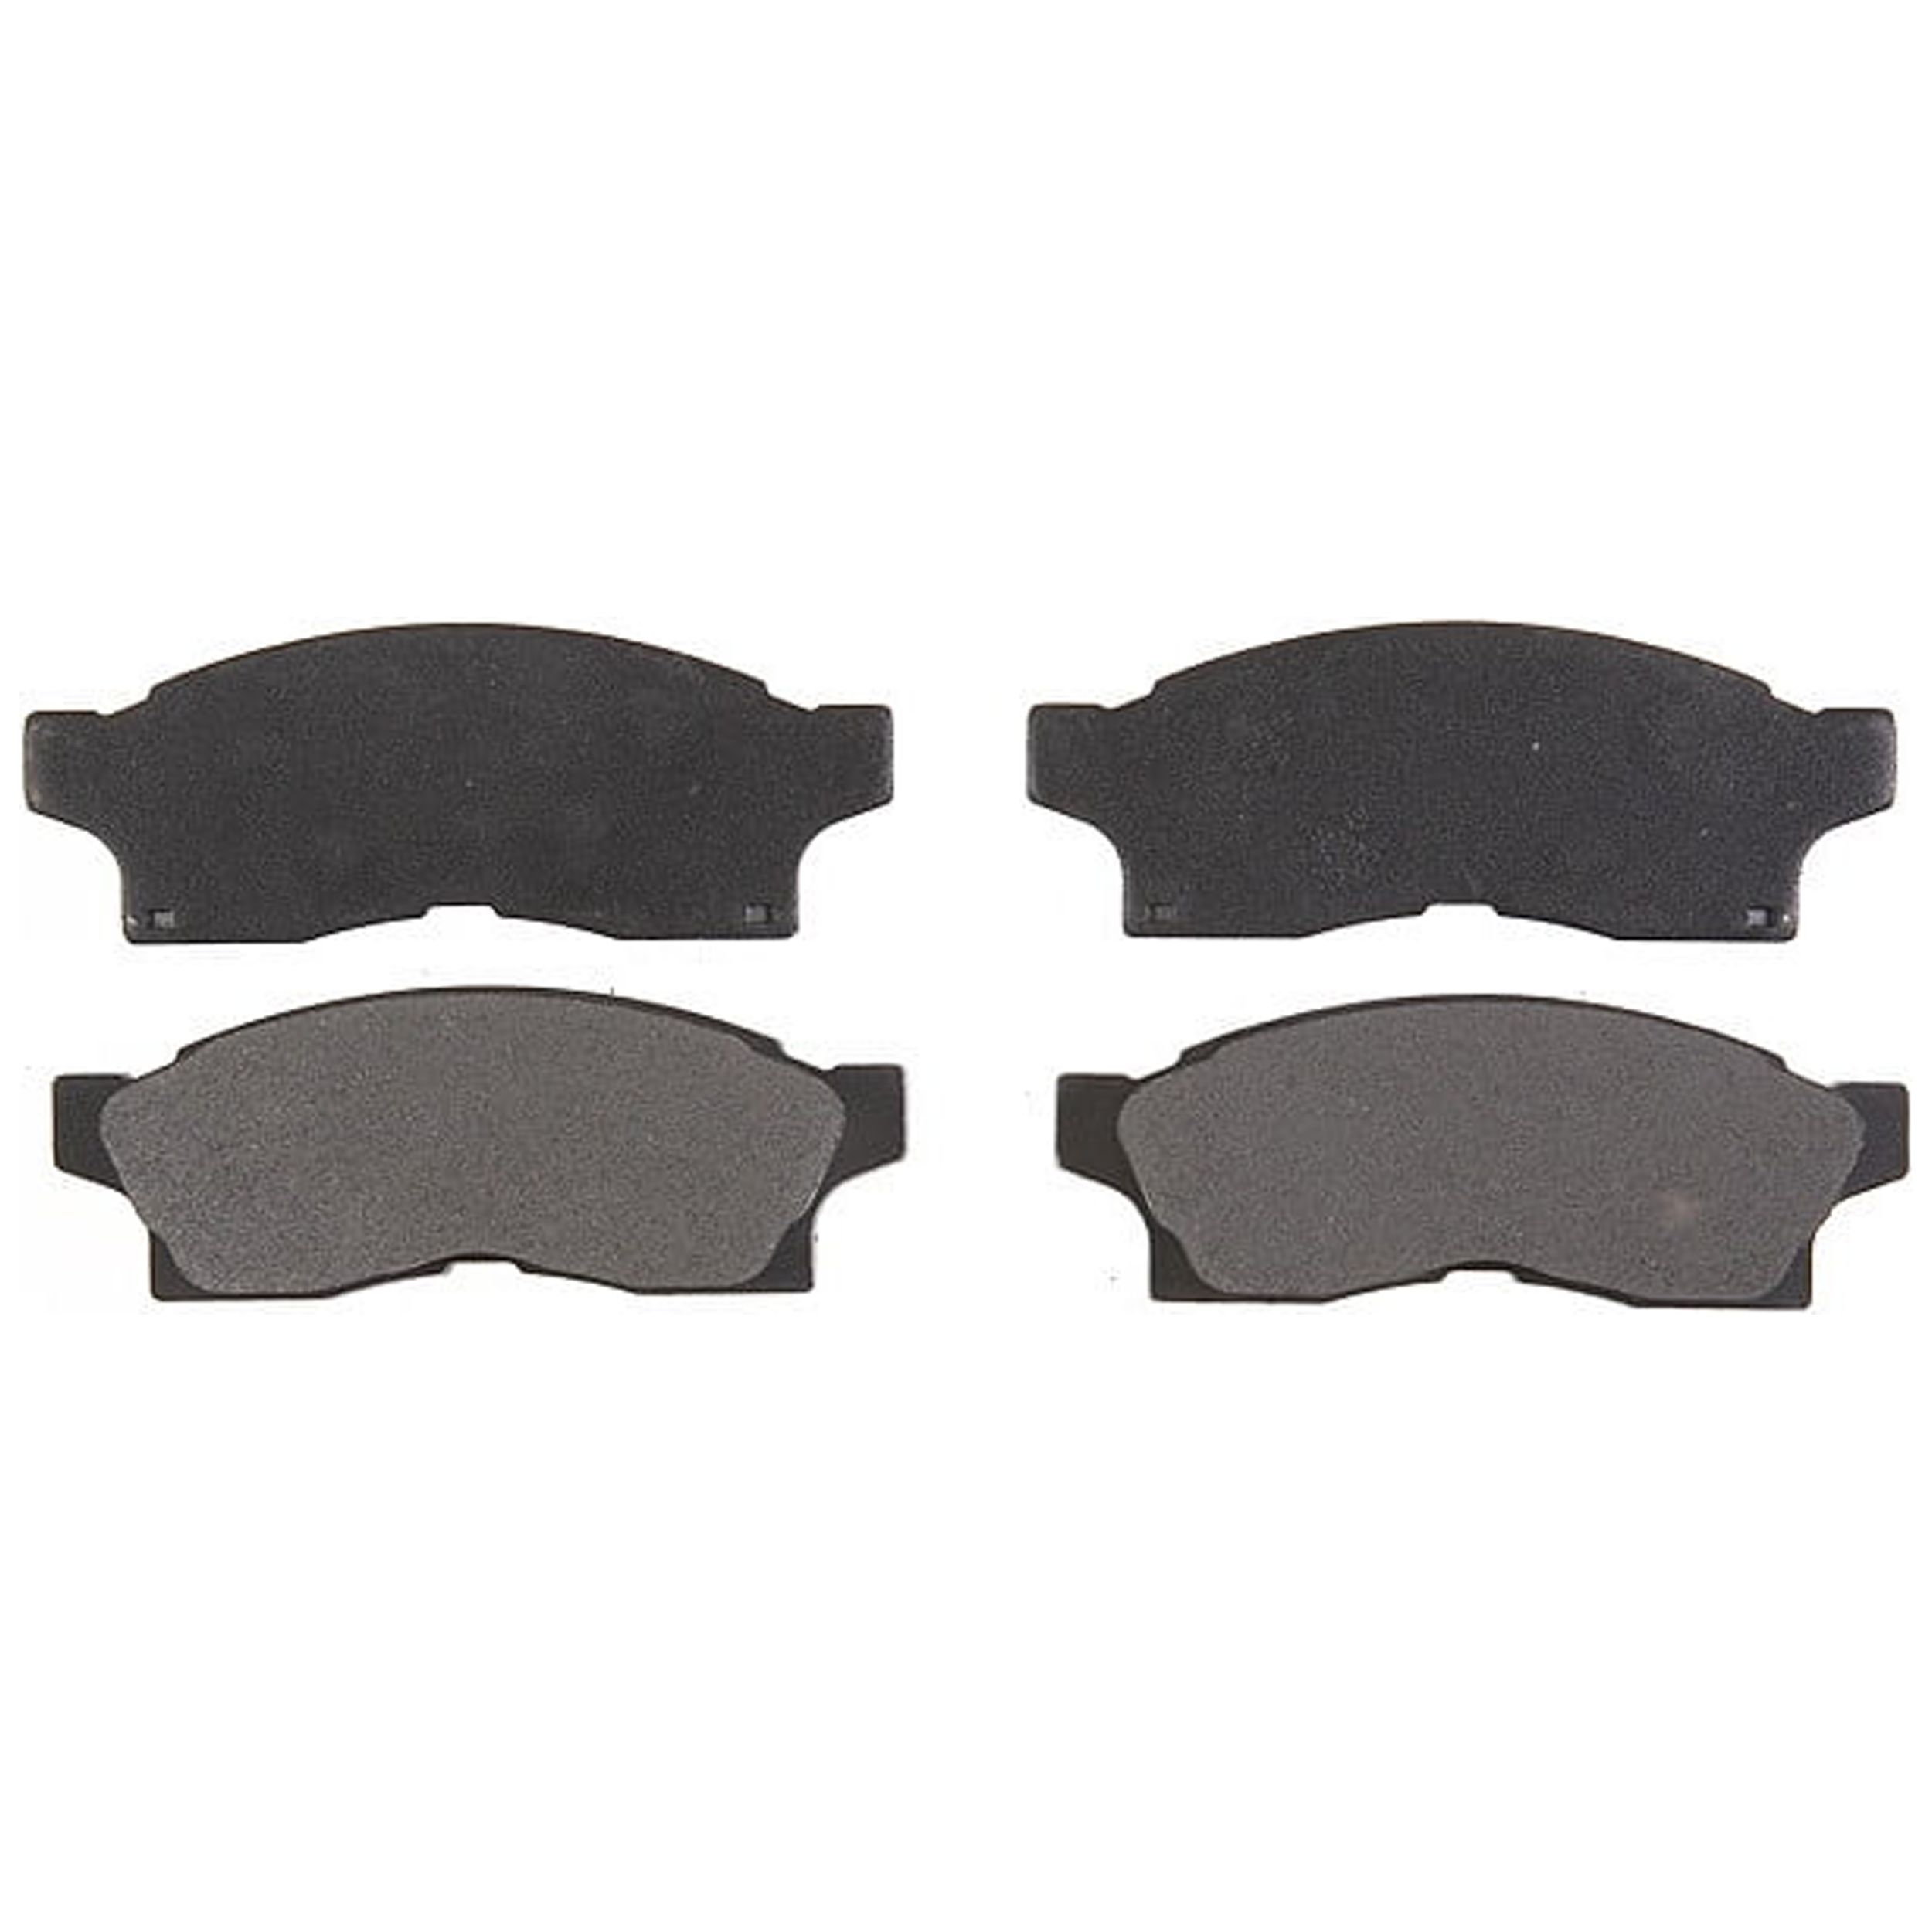 Raybestos Element3 PG Brake Pads Fits select: 1991-1992 TOYOTA MR2 - image 1 of 4